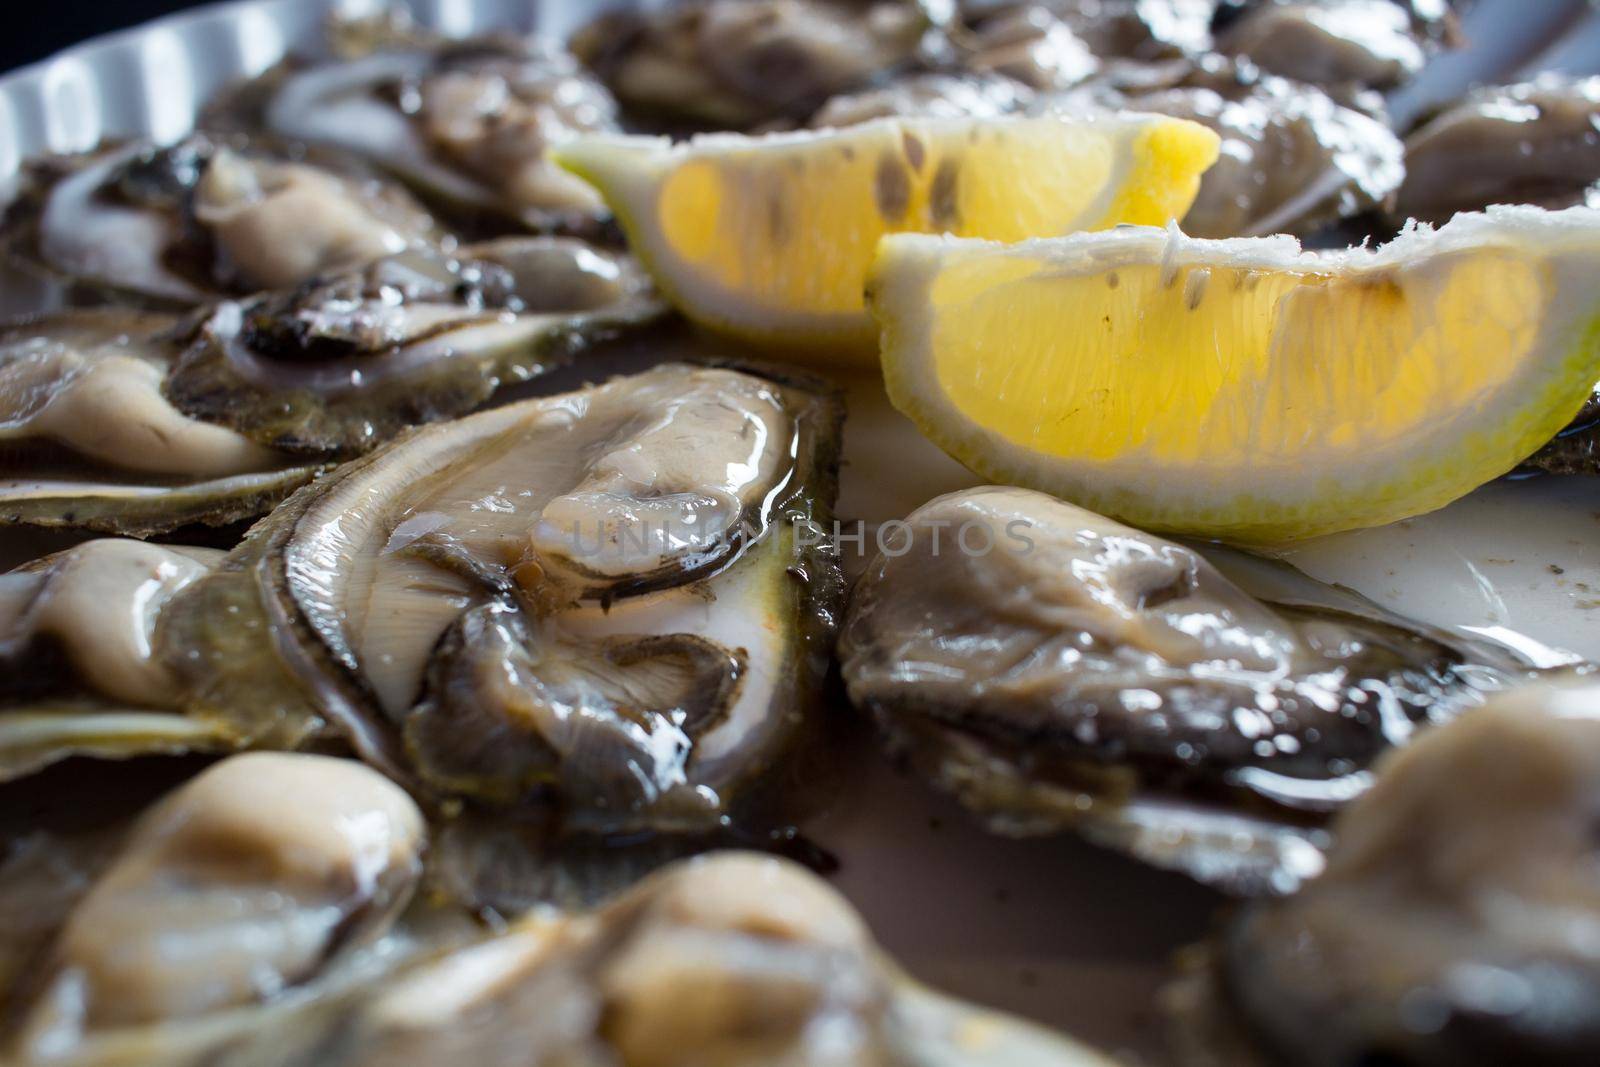 Food plate of fresh natural organic oysters with lemons